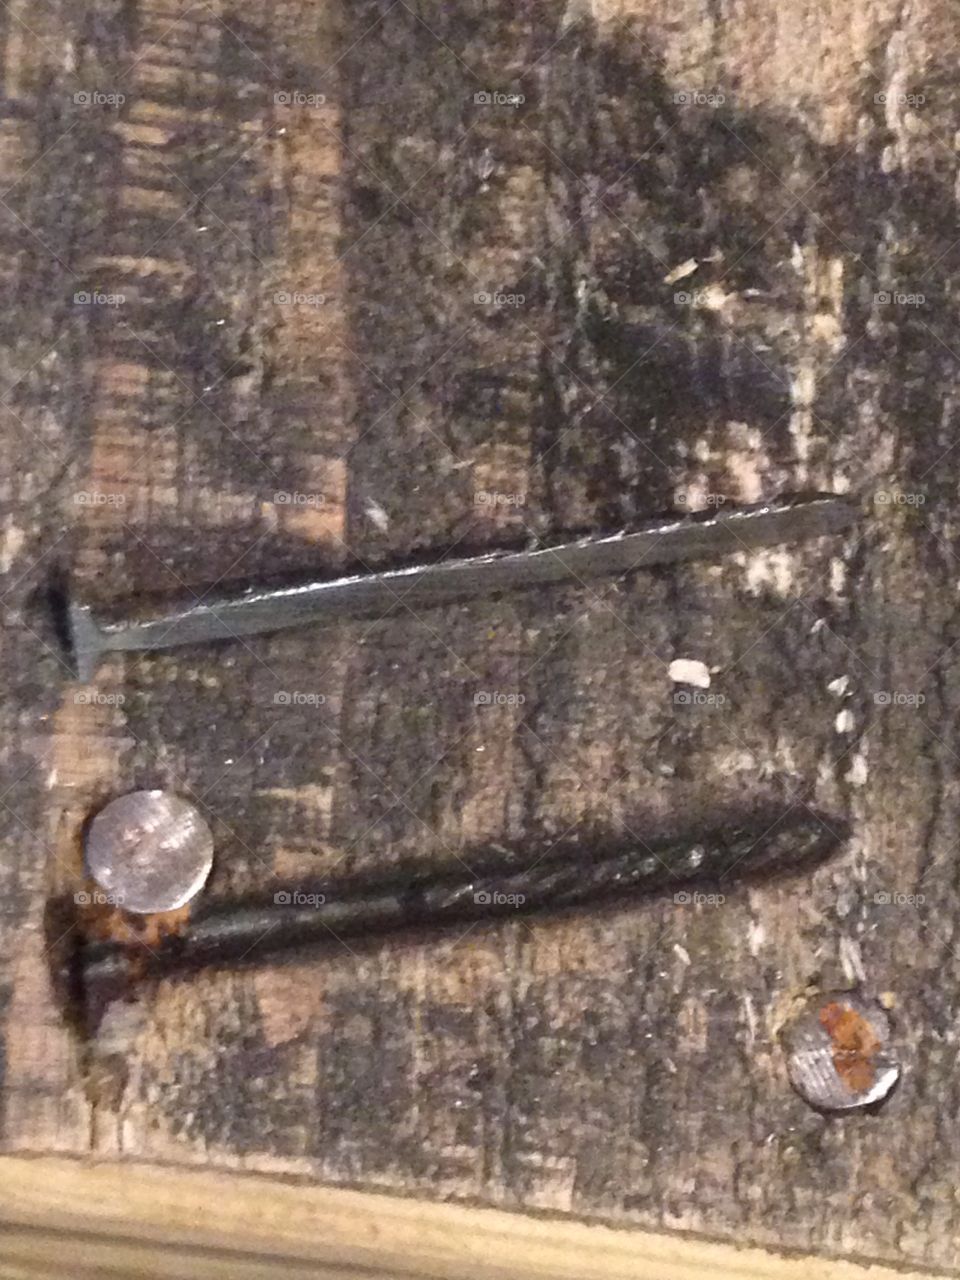 A nail flattened into a plank of wood